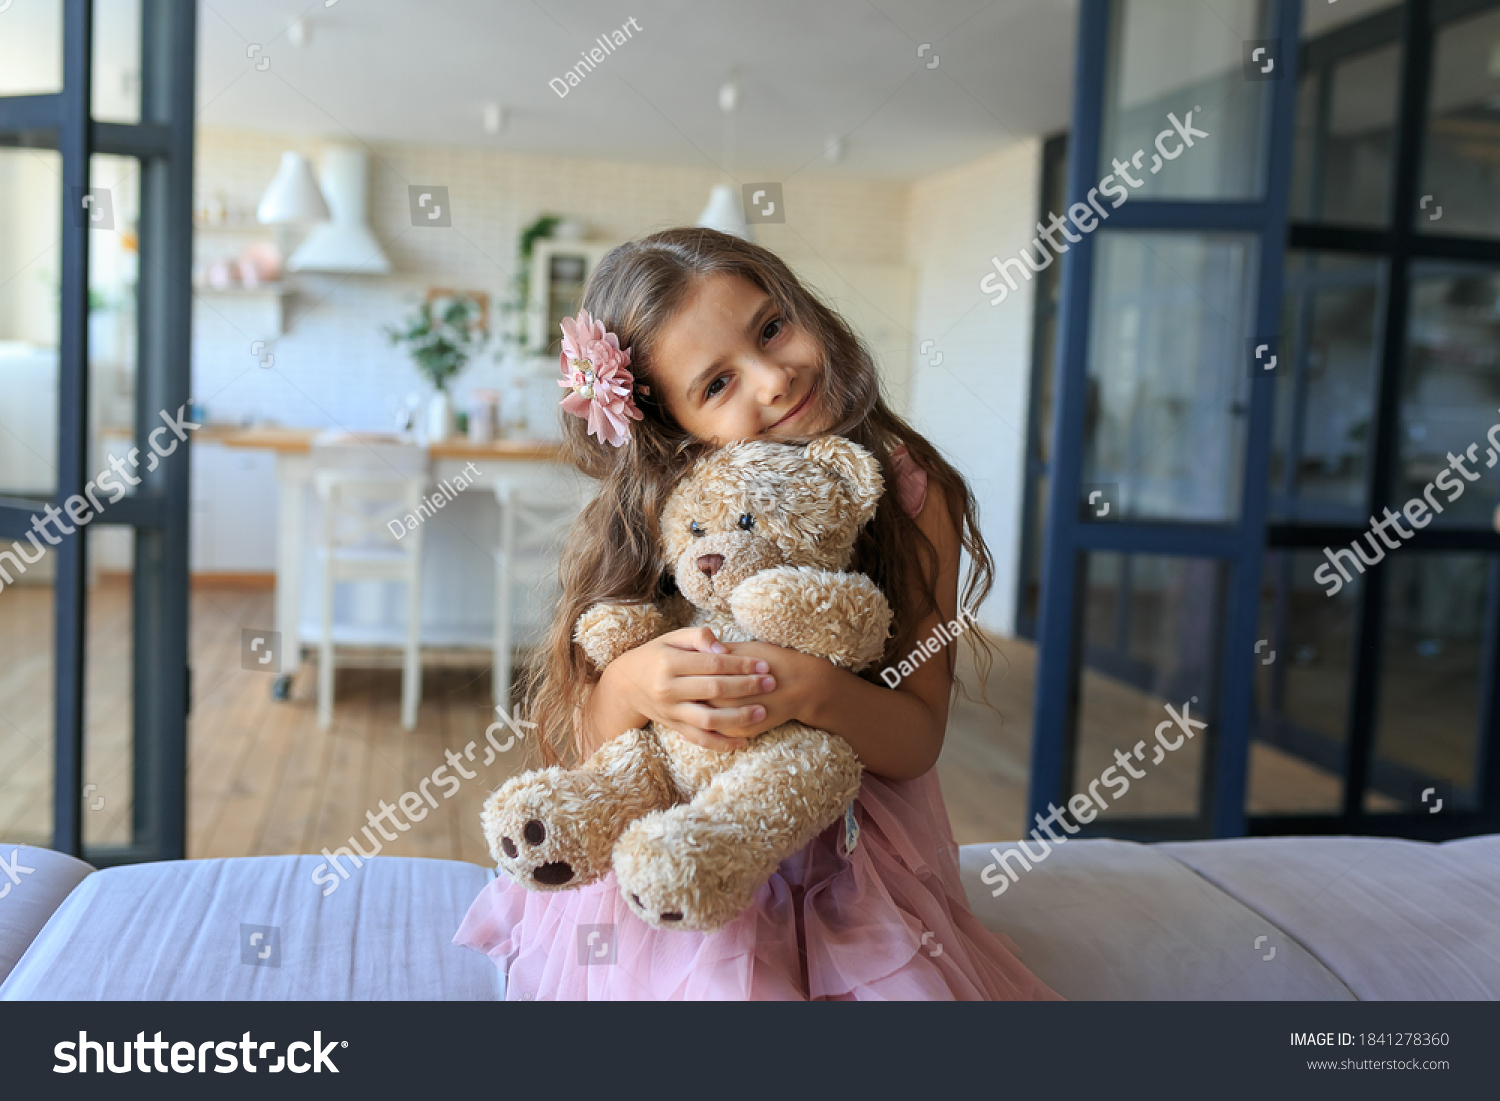 portrait of smiling little girl hugging teddy bear at home. Adorable child with long curly hair with her favorite toy on kitchen background. Happy childhood concept. Cute baby playing with plush bear #1841278360